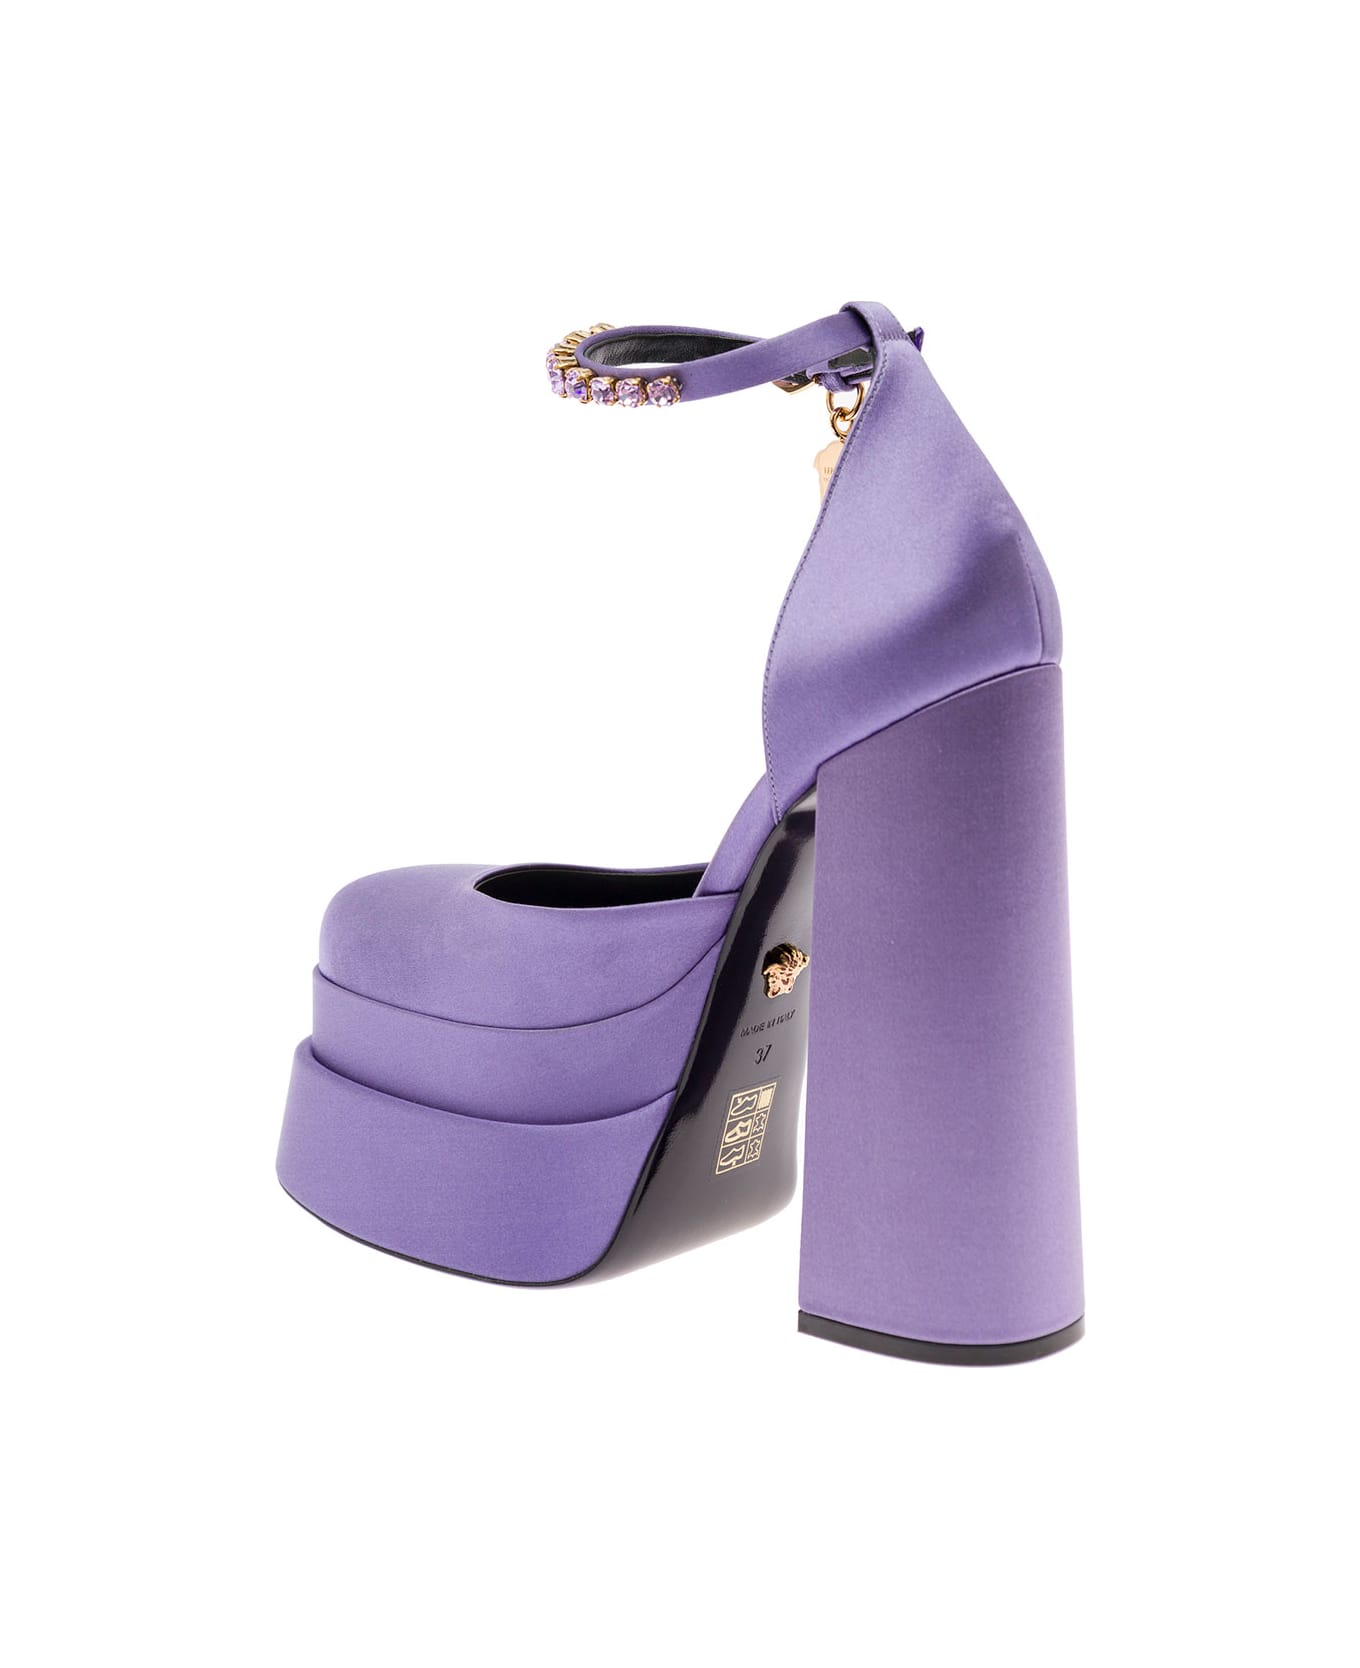 Versace Mary Jane Lilac Satin Pumps With Medusa Charm Versace Woman - Violet